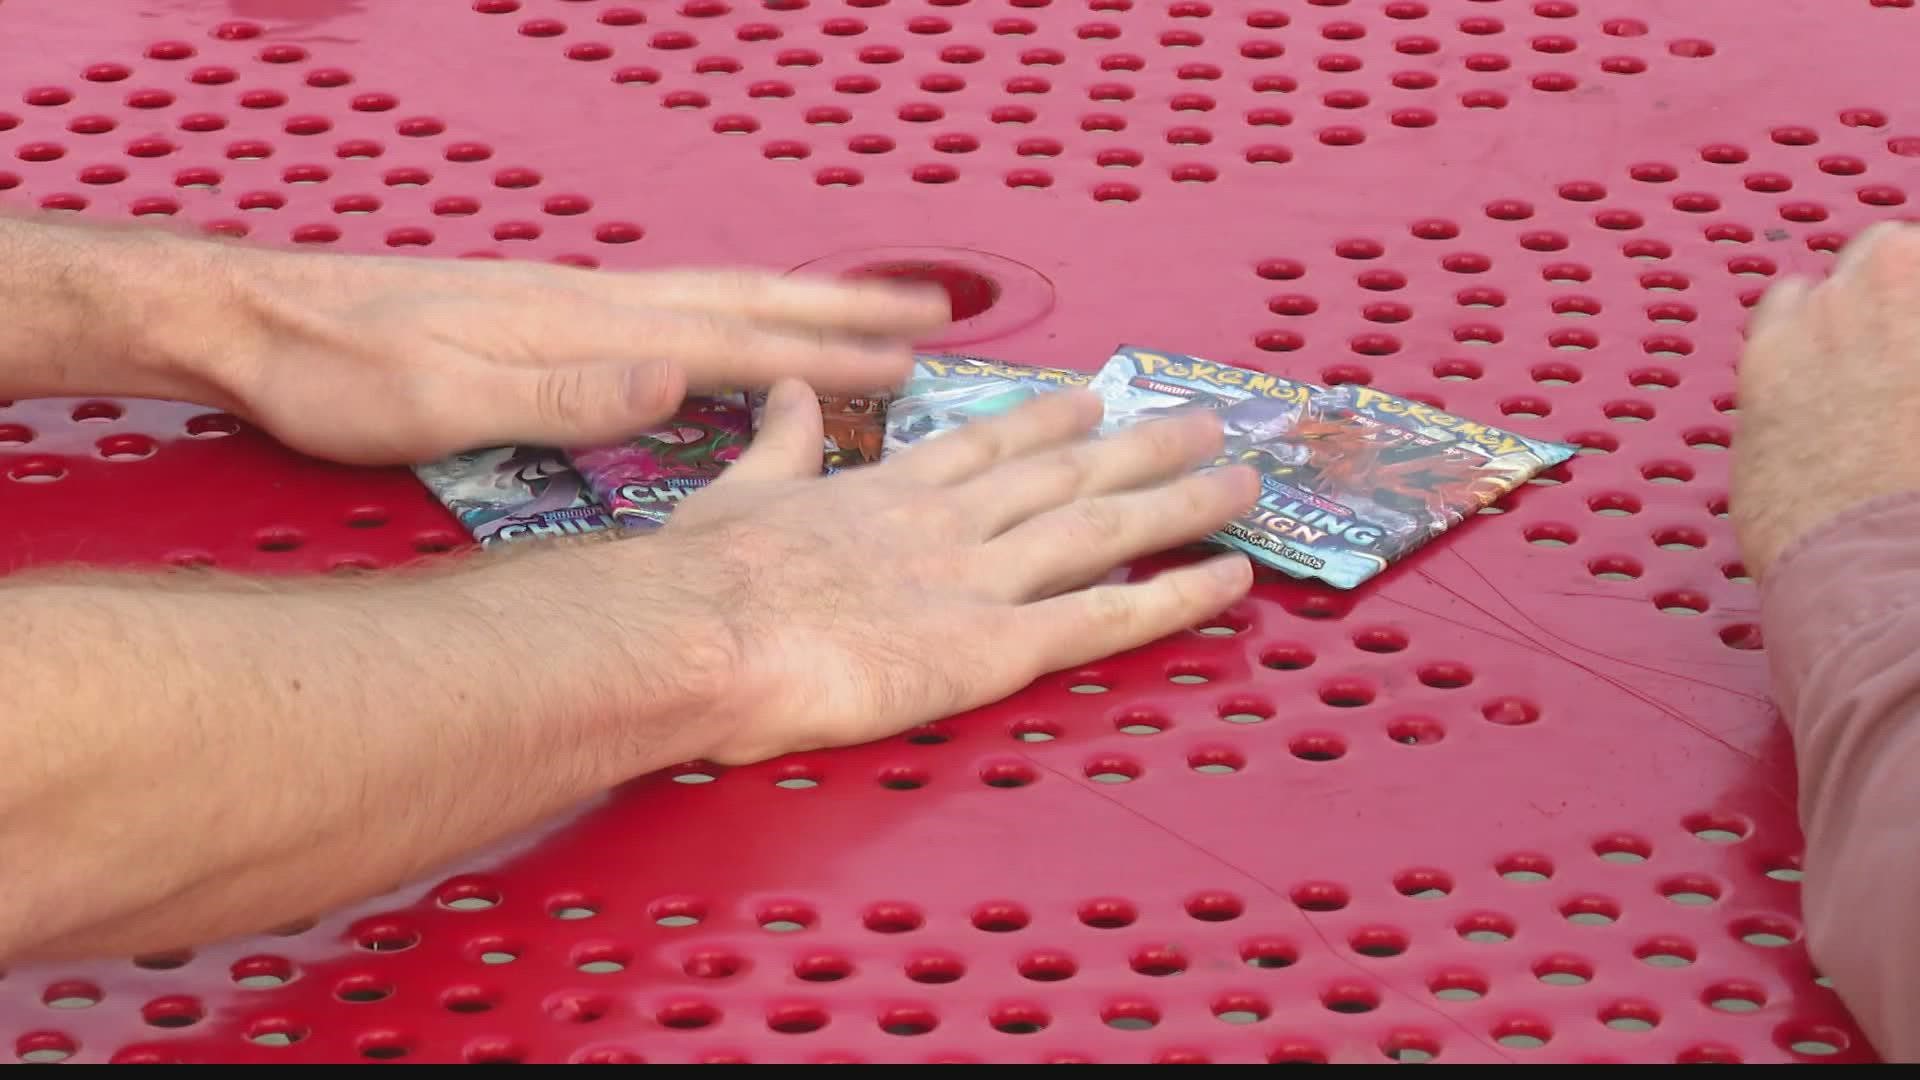 Moonshot Games will be hiding $10,000 worth of Pokémon cards around the Indiana State Fairgrounds through Aug. 22.